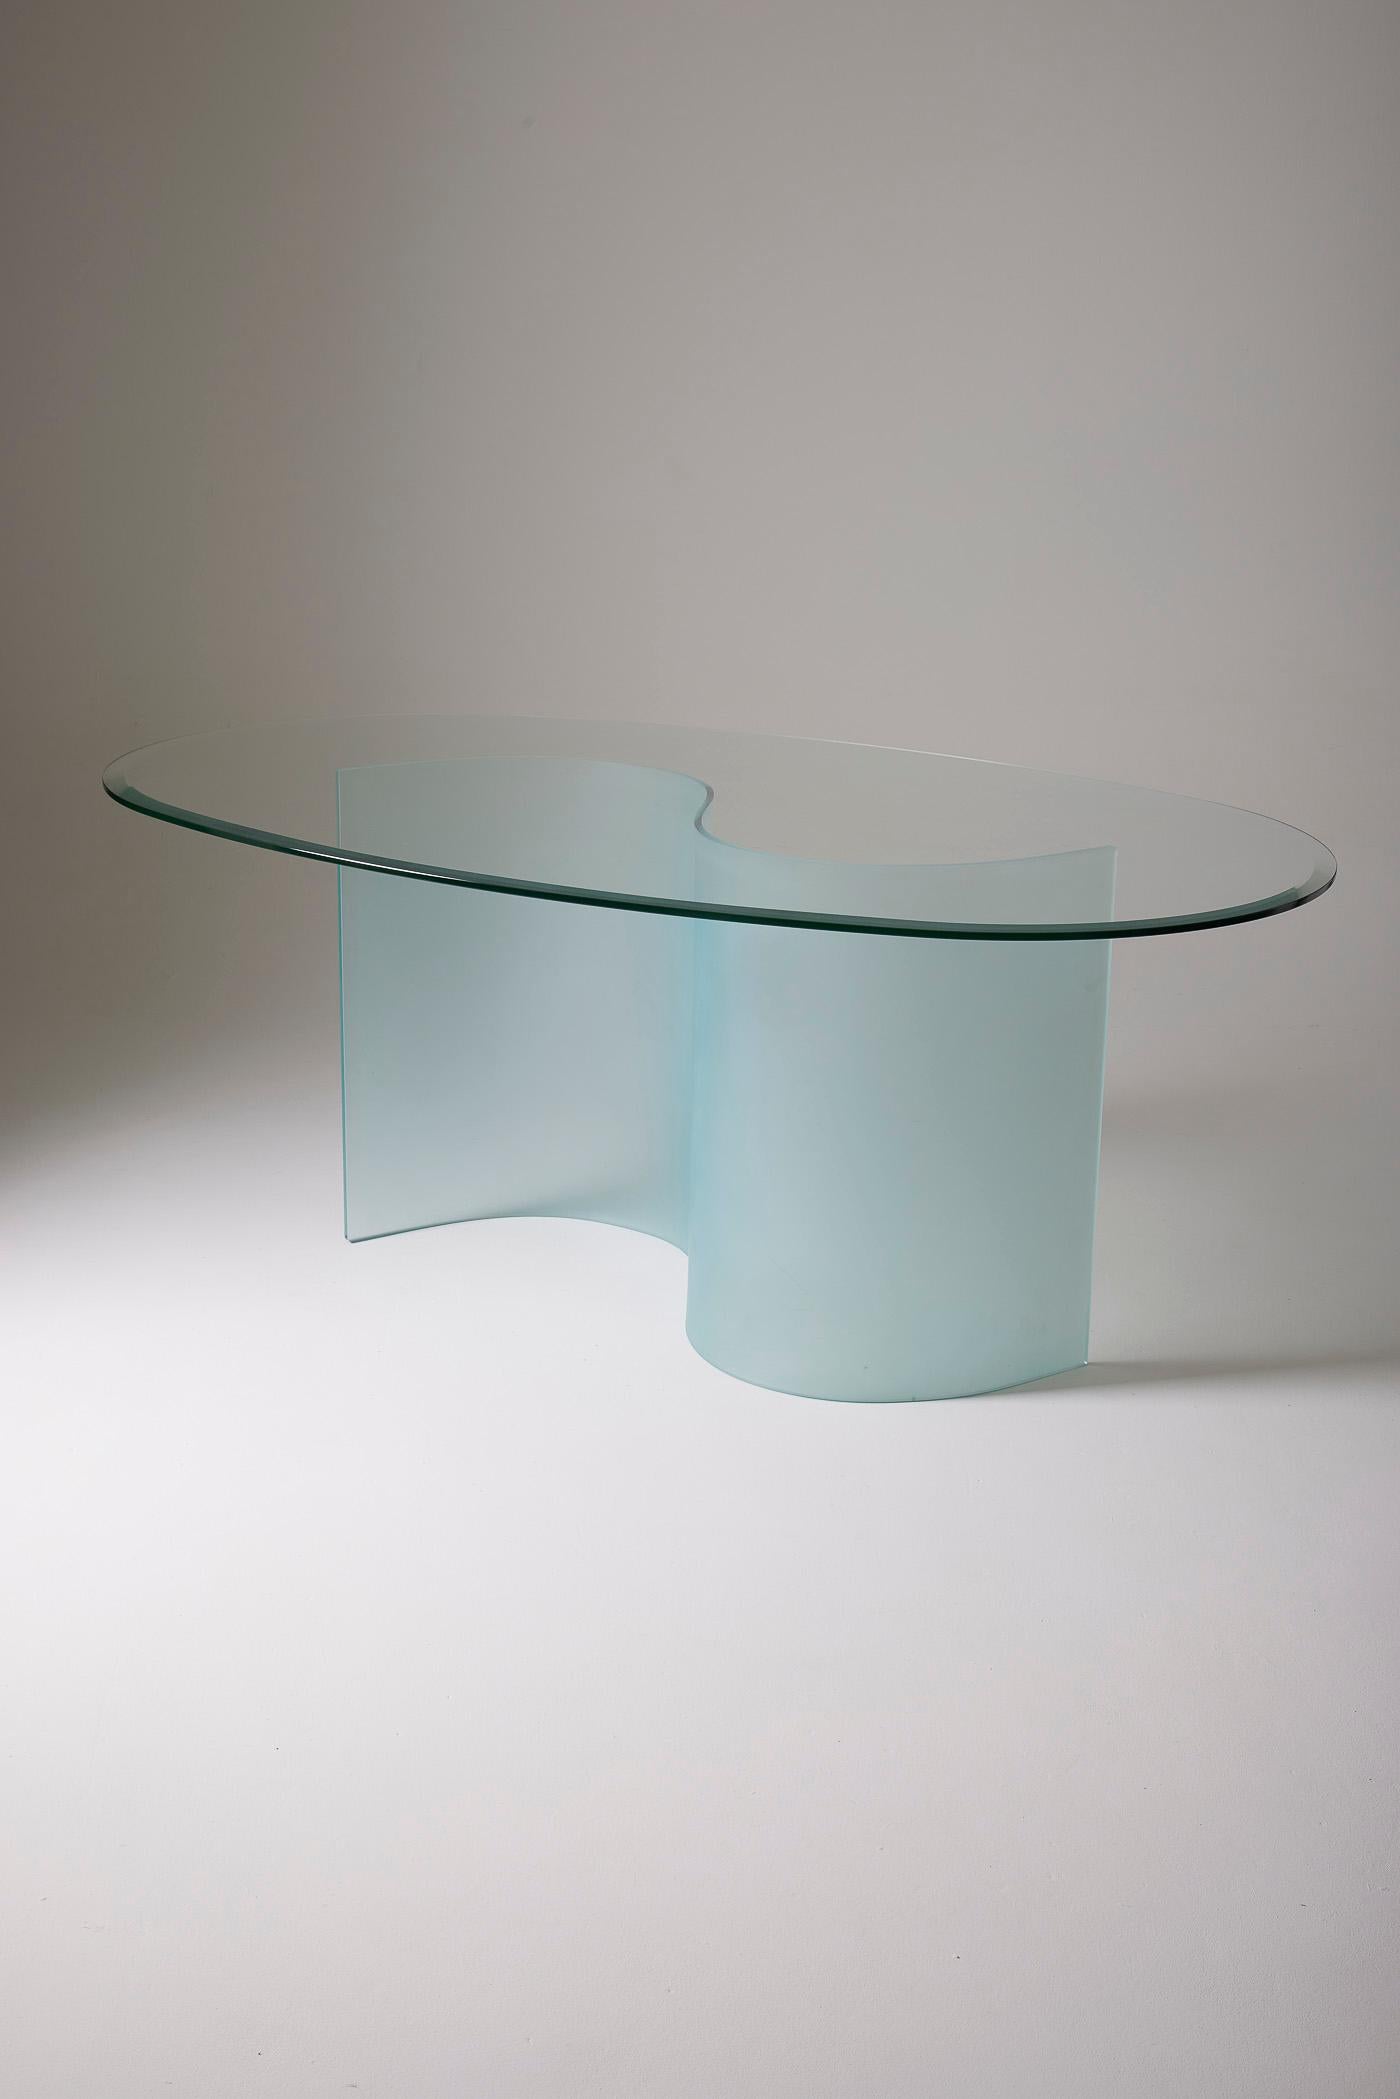 Glass dining table in the style of the 70s. The oval top rests on an S-shaped base. Very good condition.
LP1525